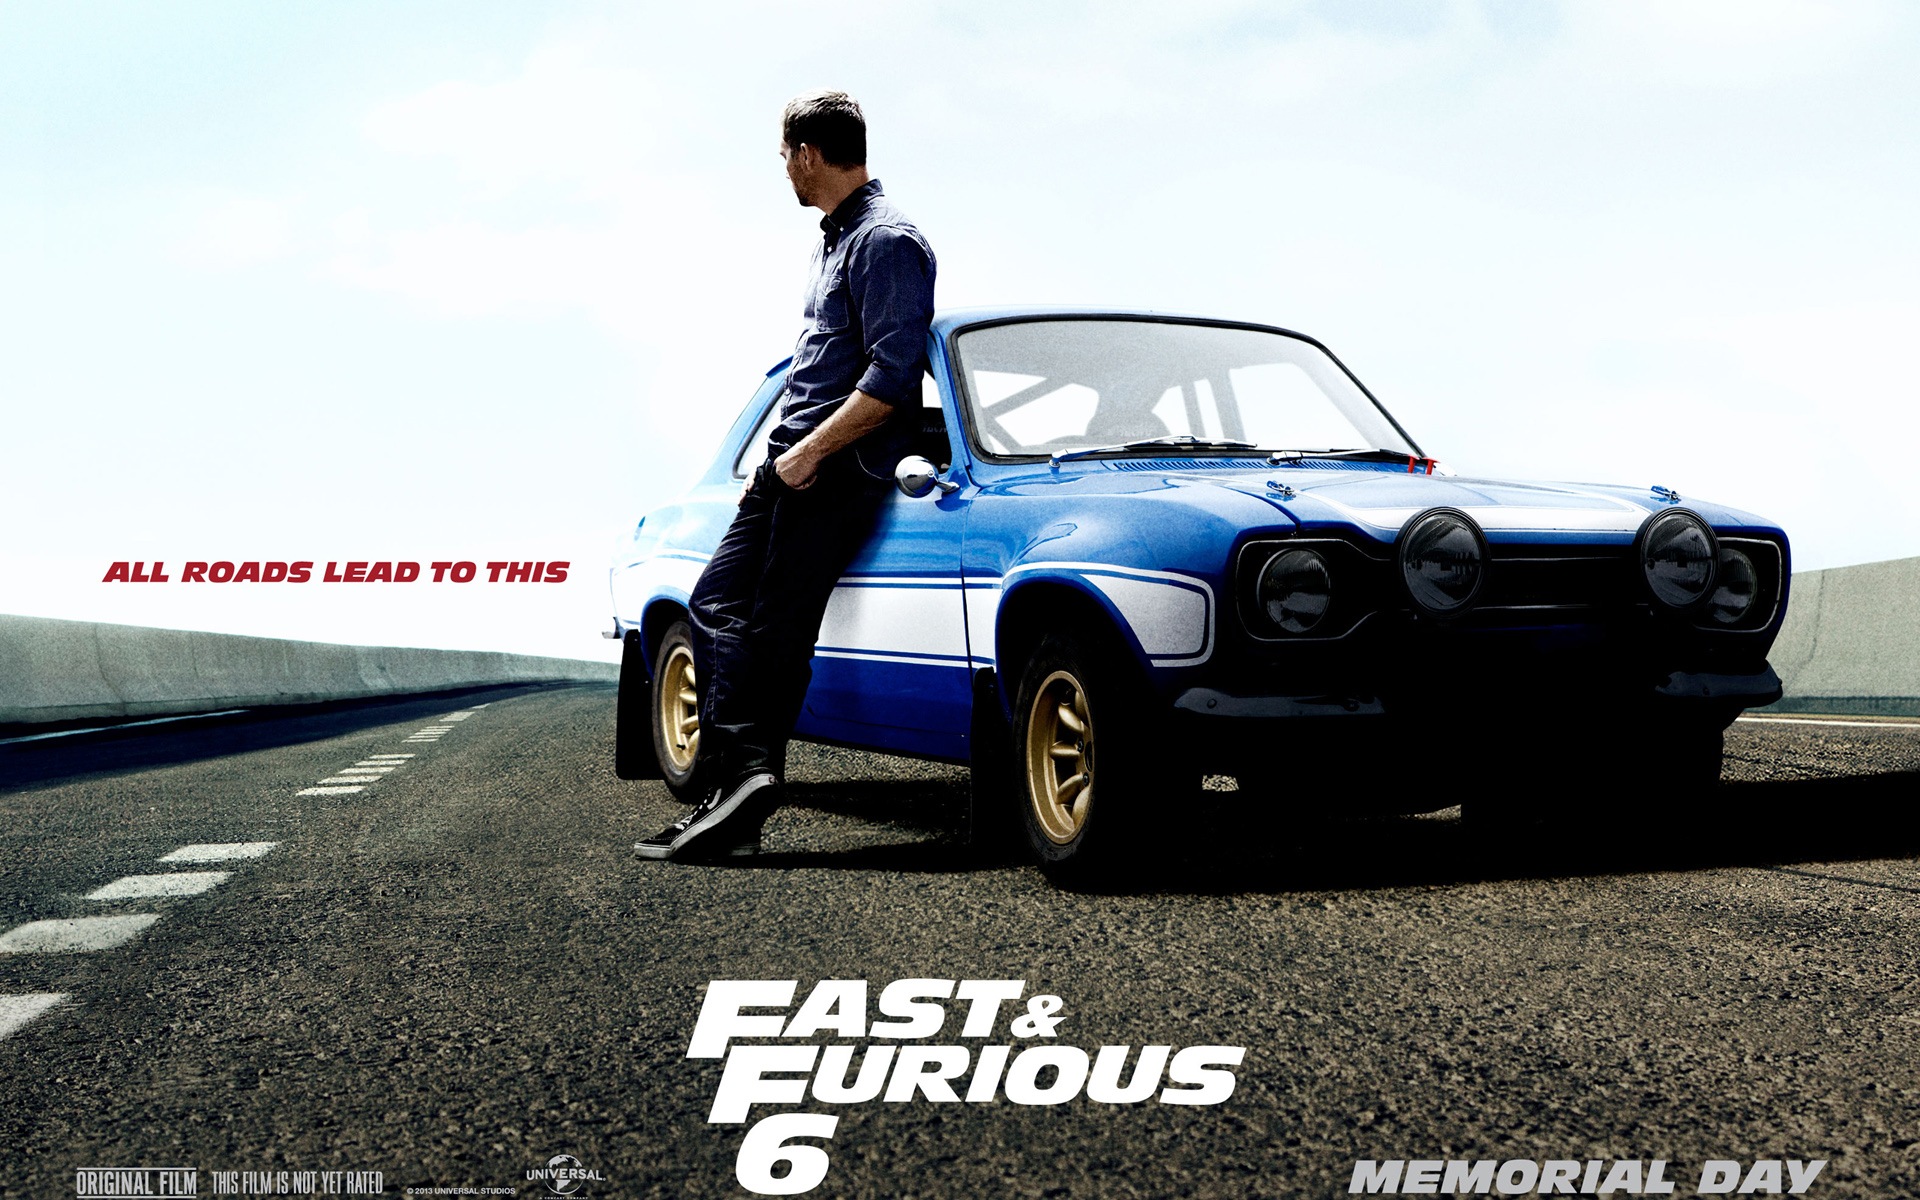 Fast And Furious 6 HD movie wallpapers #10 - 1920x1200